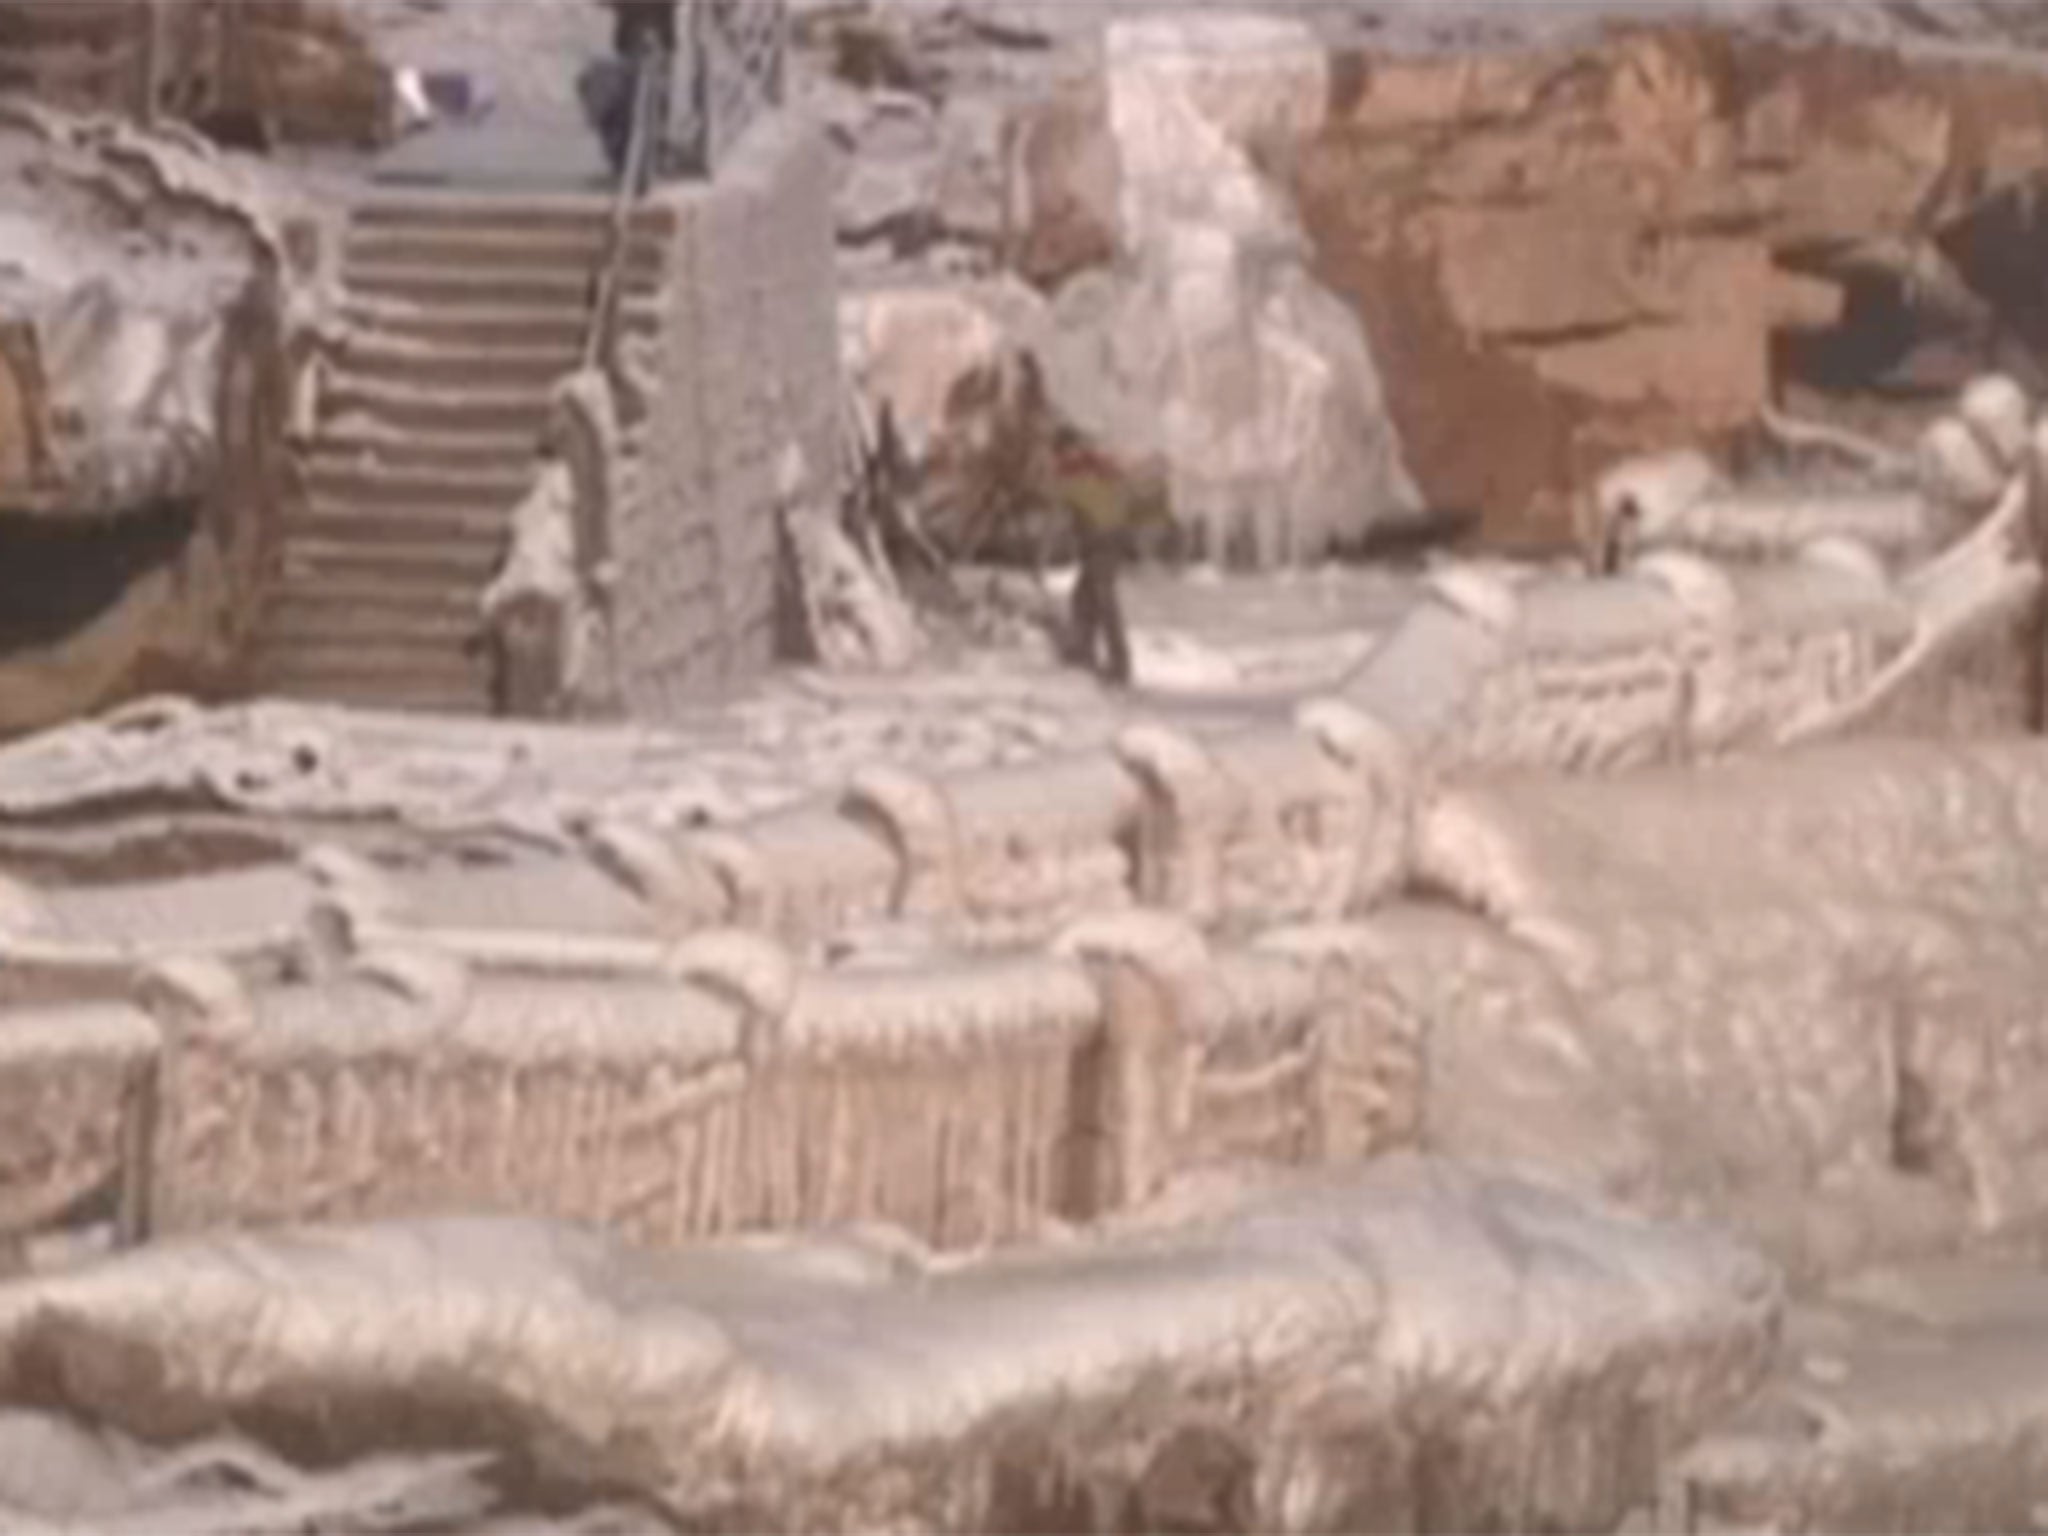 Tourists are flocking to a section of China's Yellow River in far greater numbers as part of the Hukou Waterfall has frozen over in the incredibly cold weather.